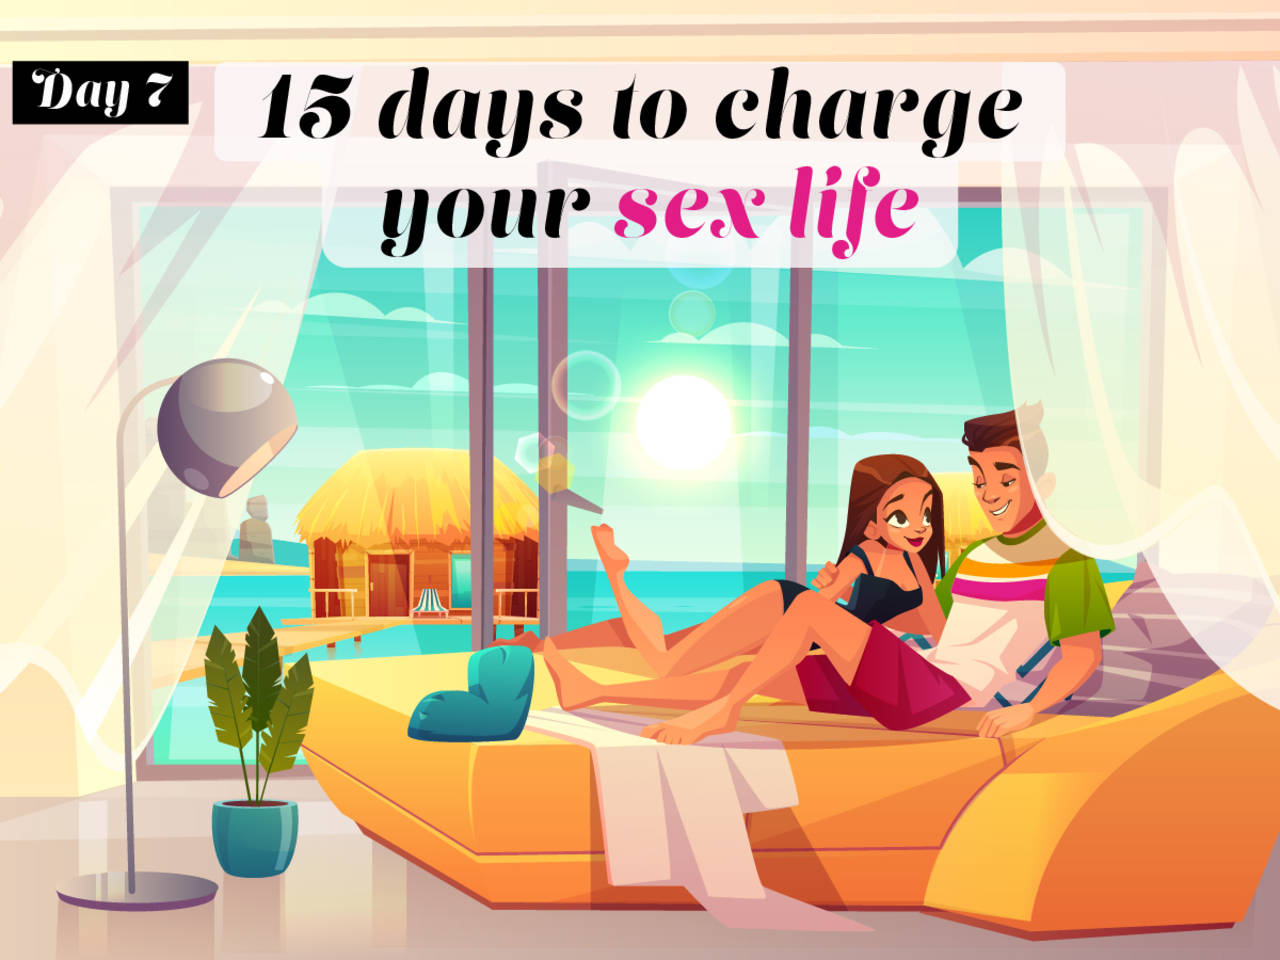 15 days to spice up your sex life in 2020 Blindfold and put on a little show (tip no